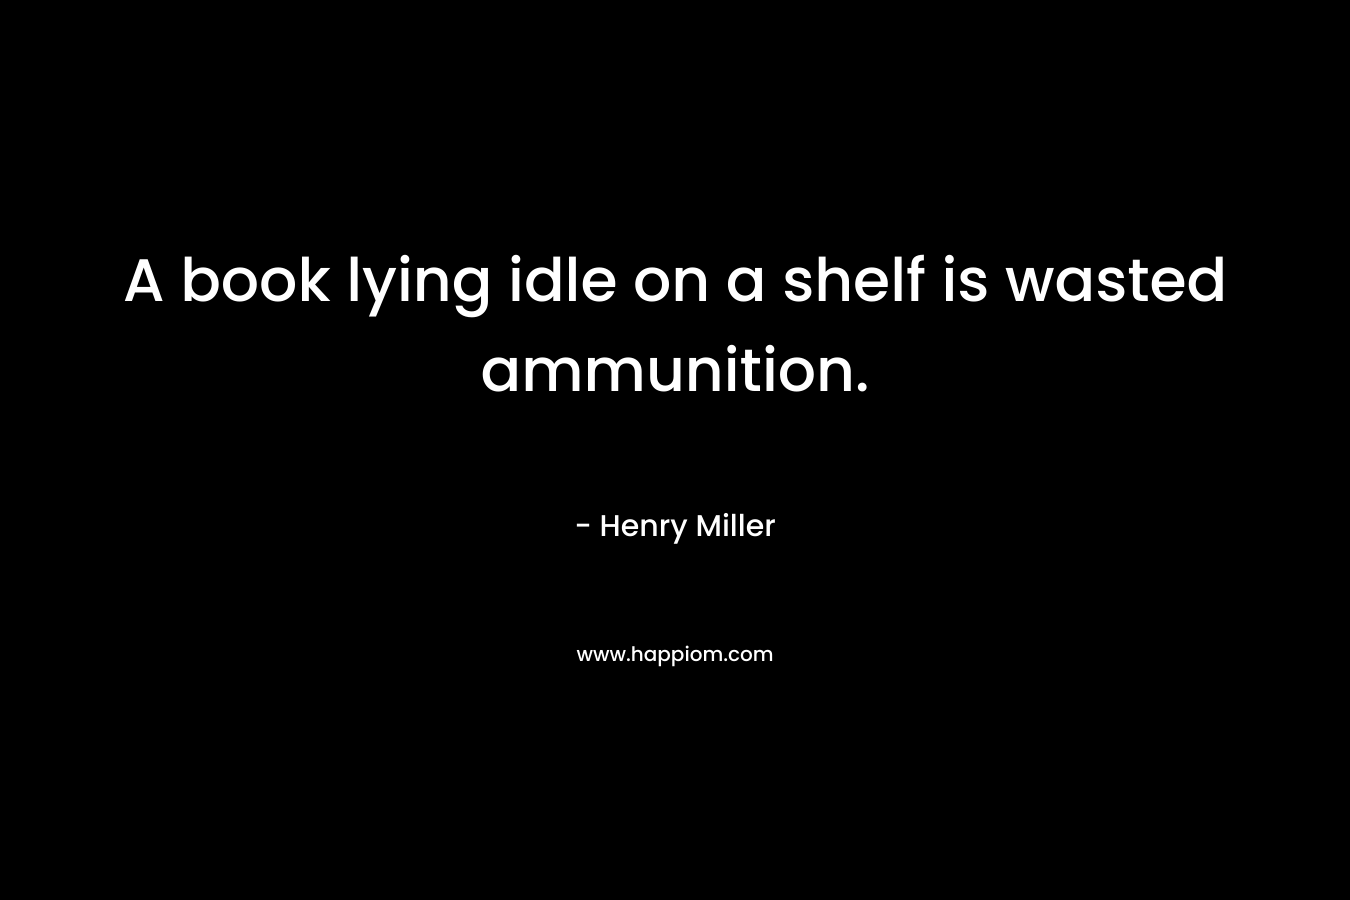 A book lying idle on a shelf is wasted ammunition.